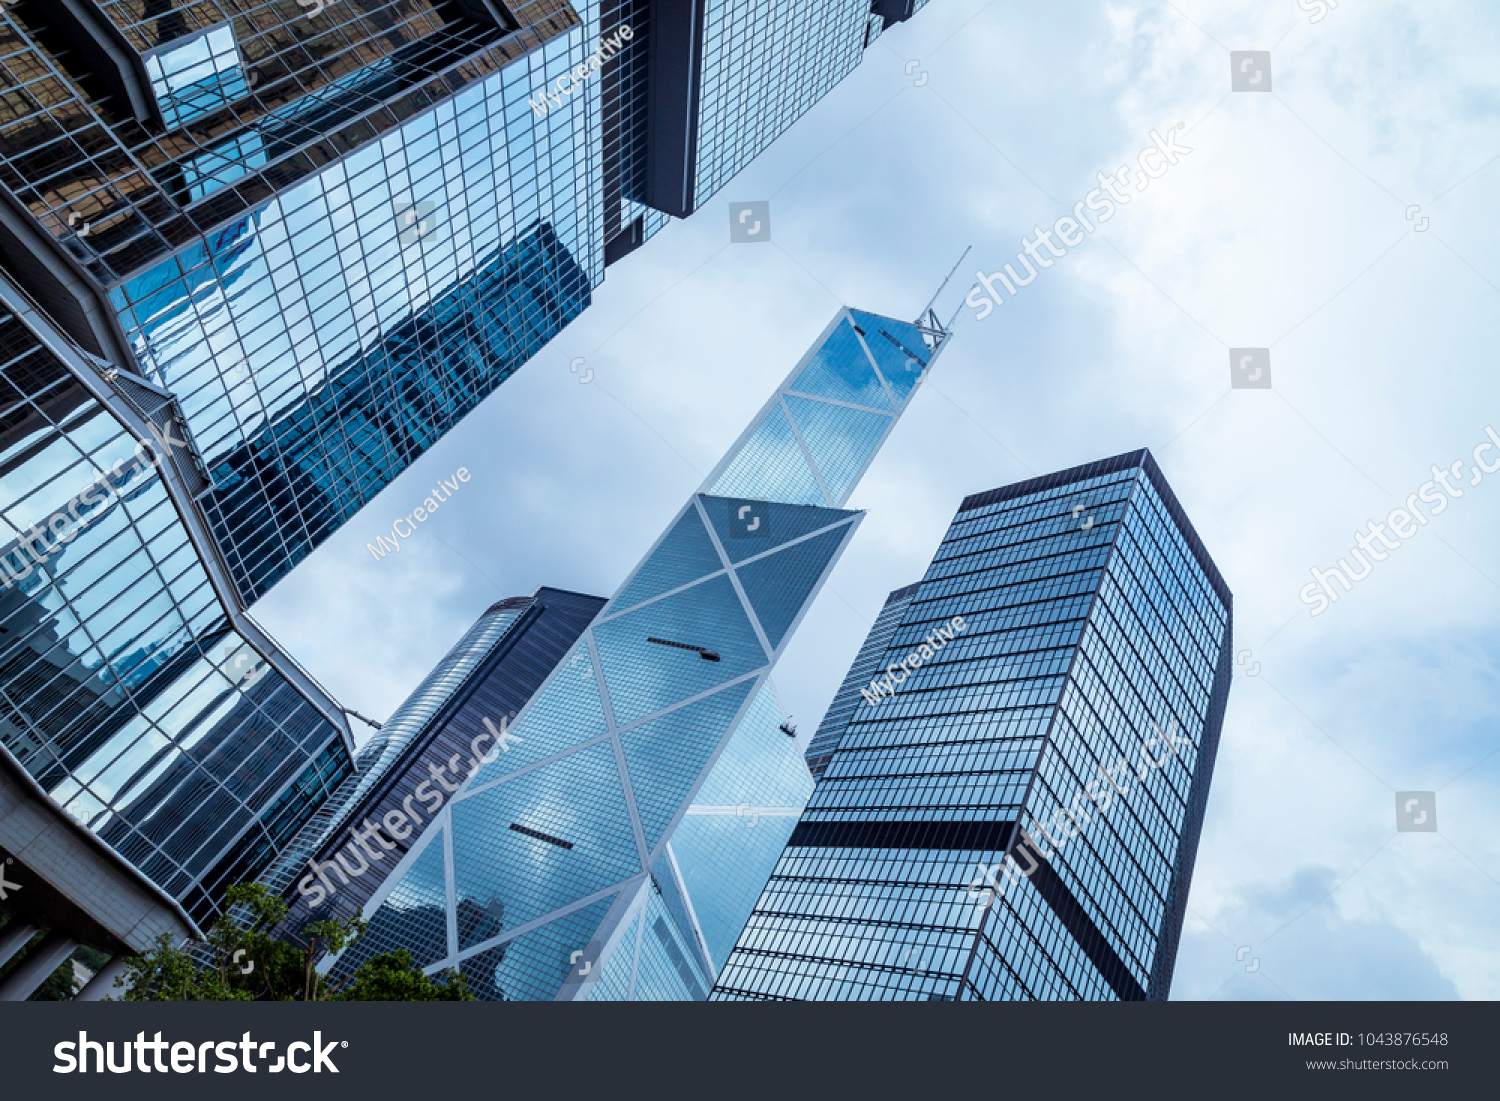 Bottom view of office building window close up in hongkong city
 #1043876548